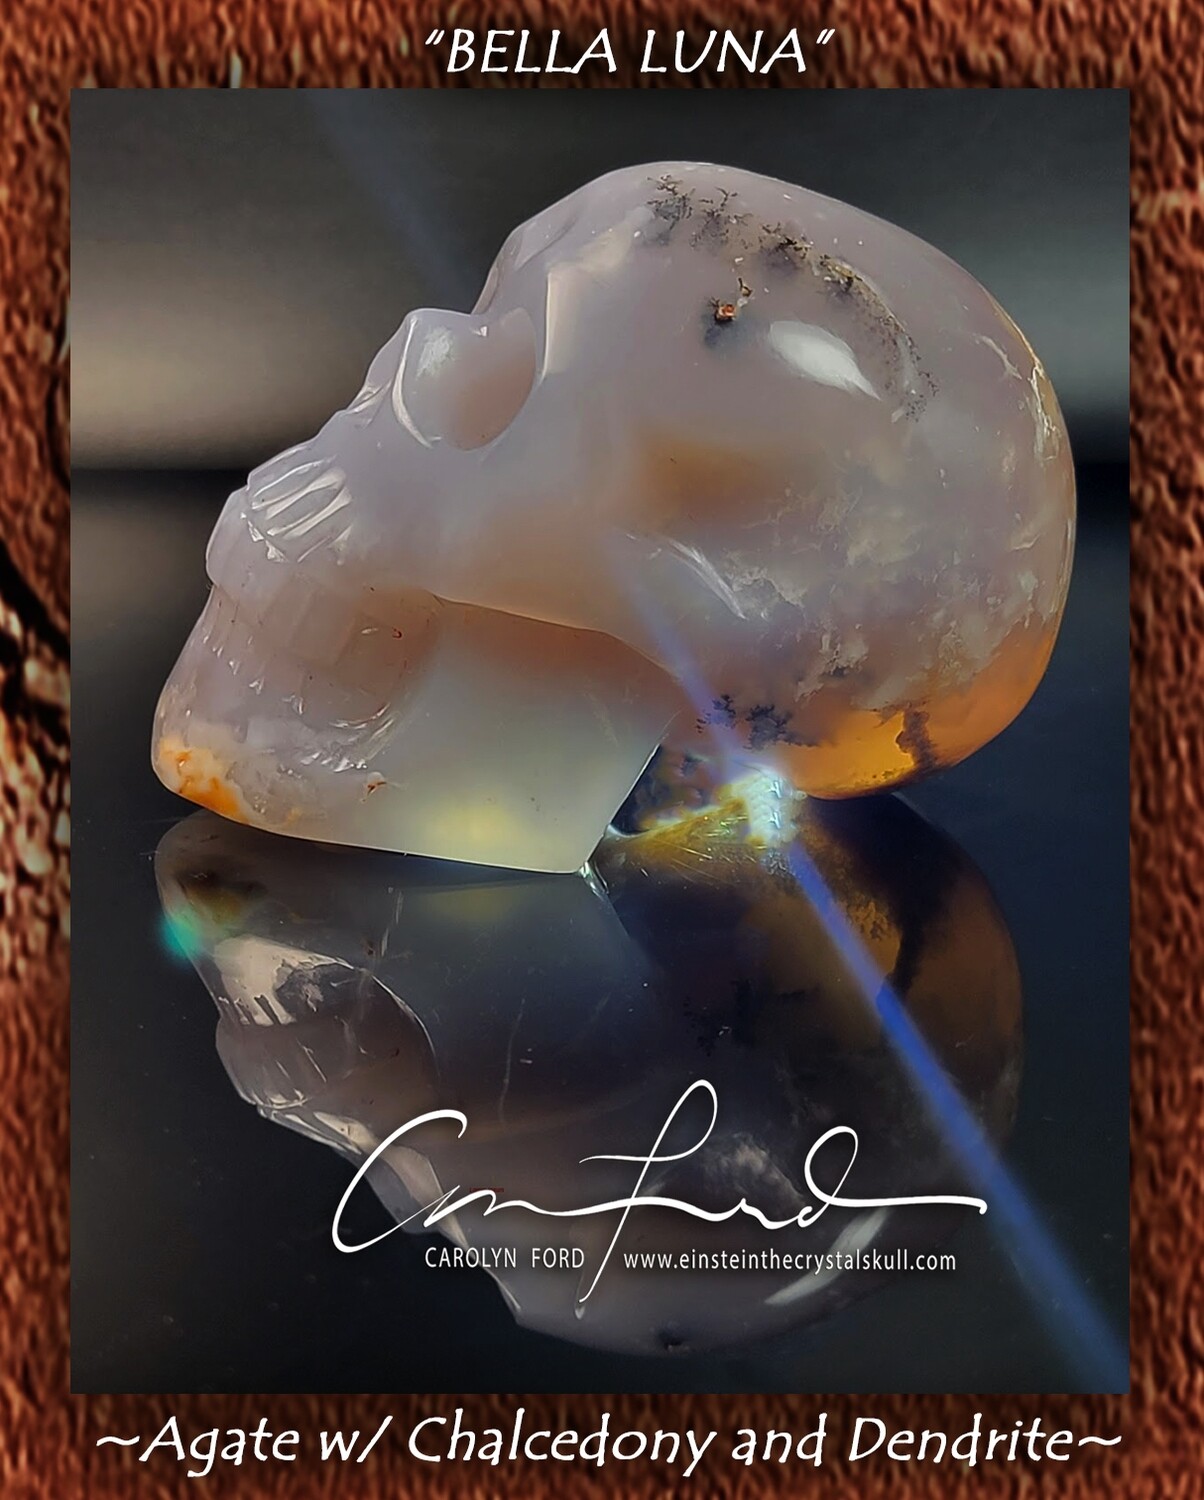 Agate w/ Chalcedony and Dendrite, Einstein the Ancient Crystal 
Skull Imprinted 